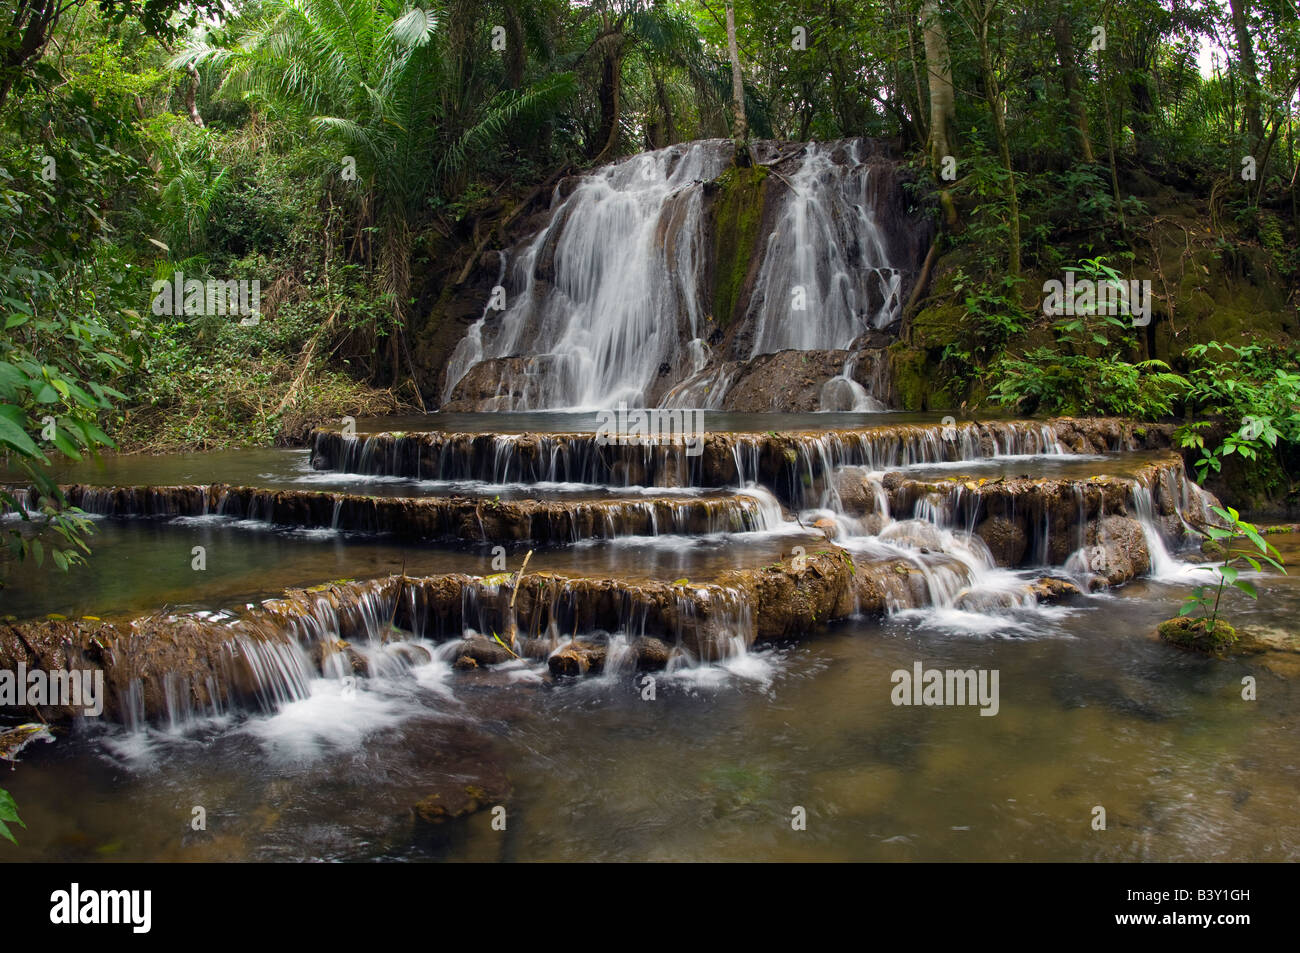 Stream and waterfall in the tropical rainforest in the state of Mato Grosso do Sul Brazil Stock Photo